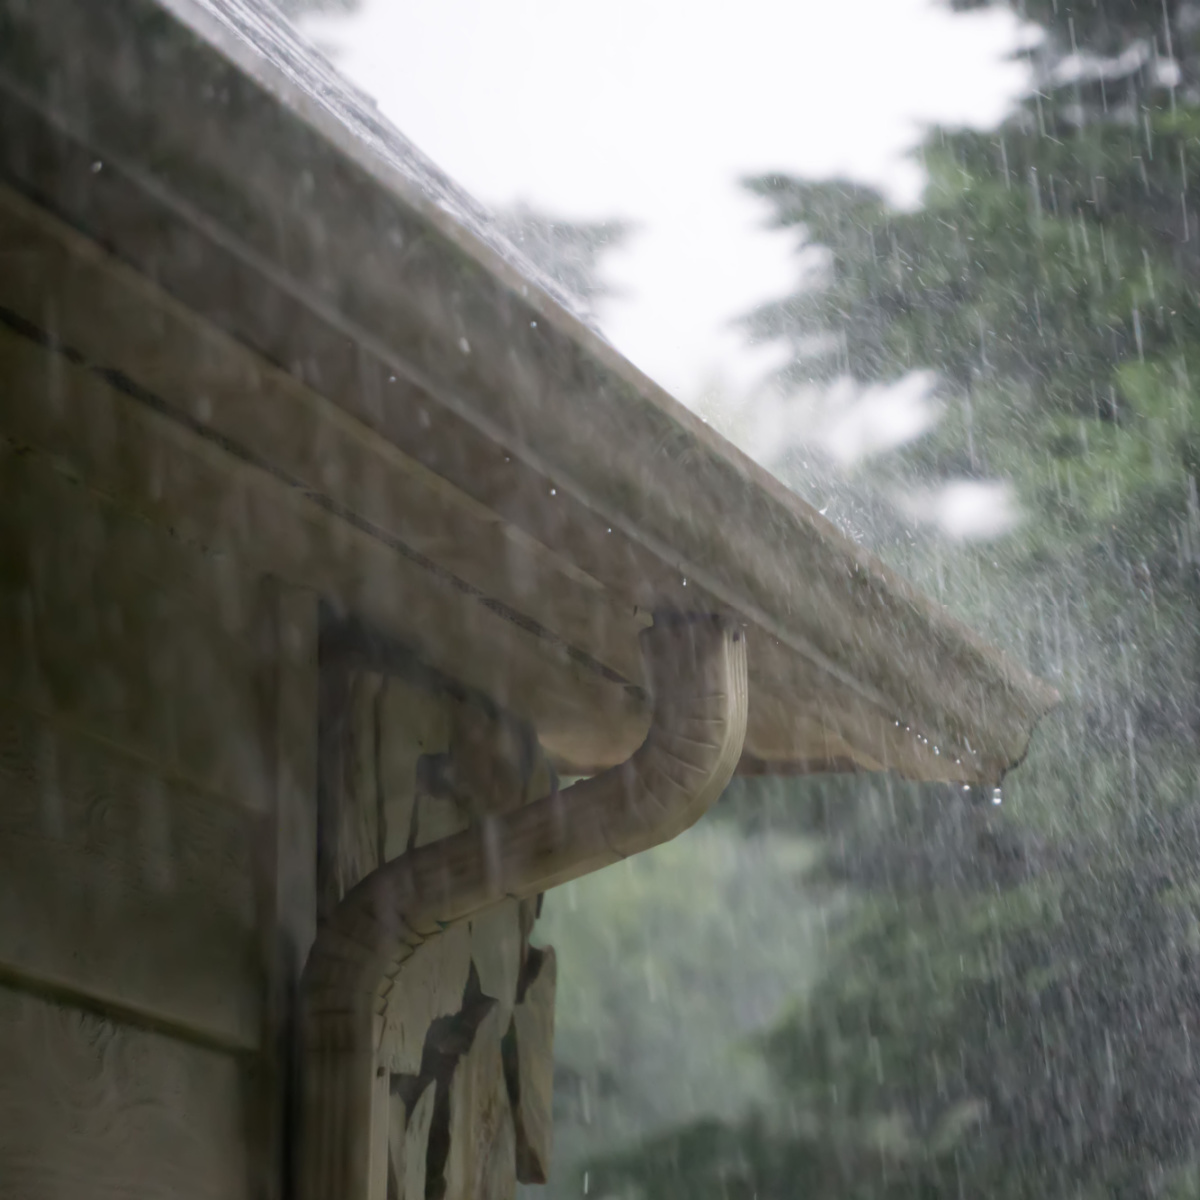 Rain pouring on an old roof